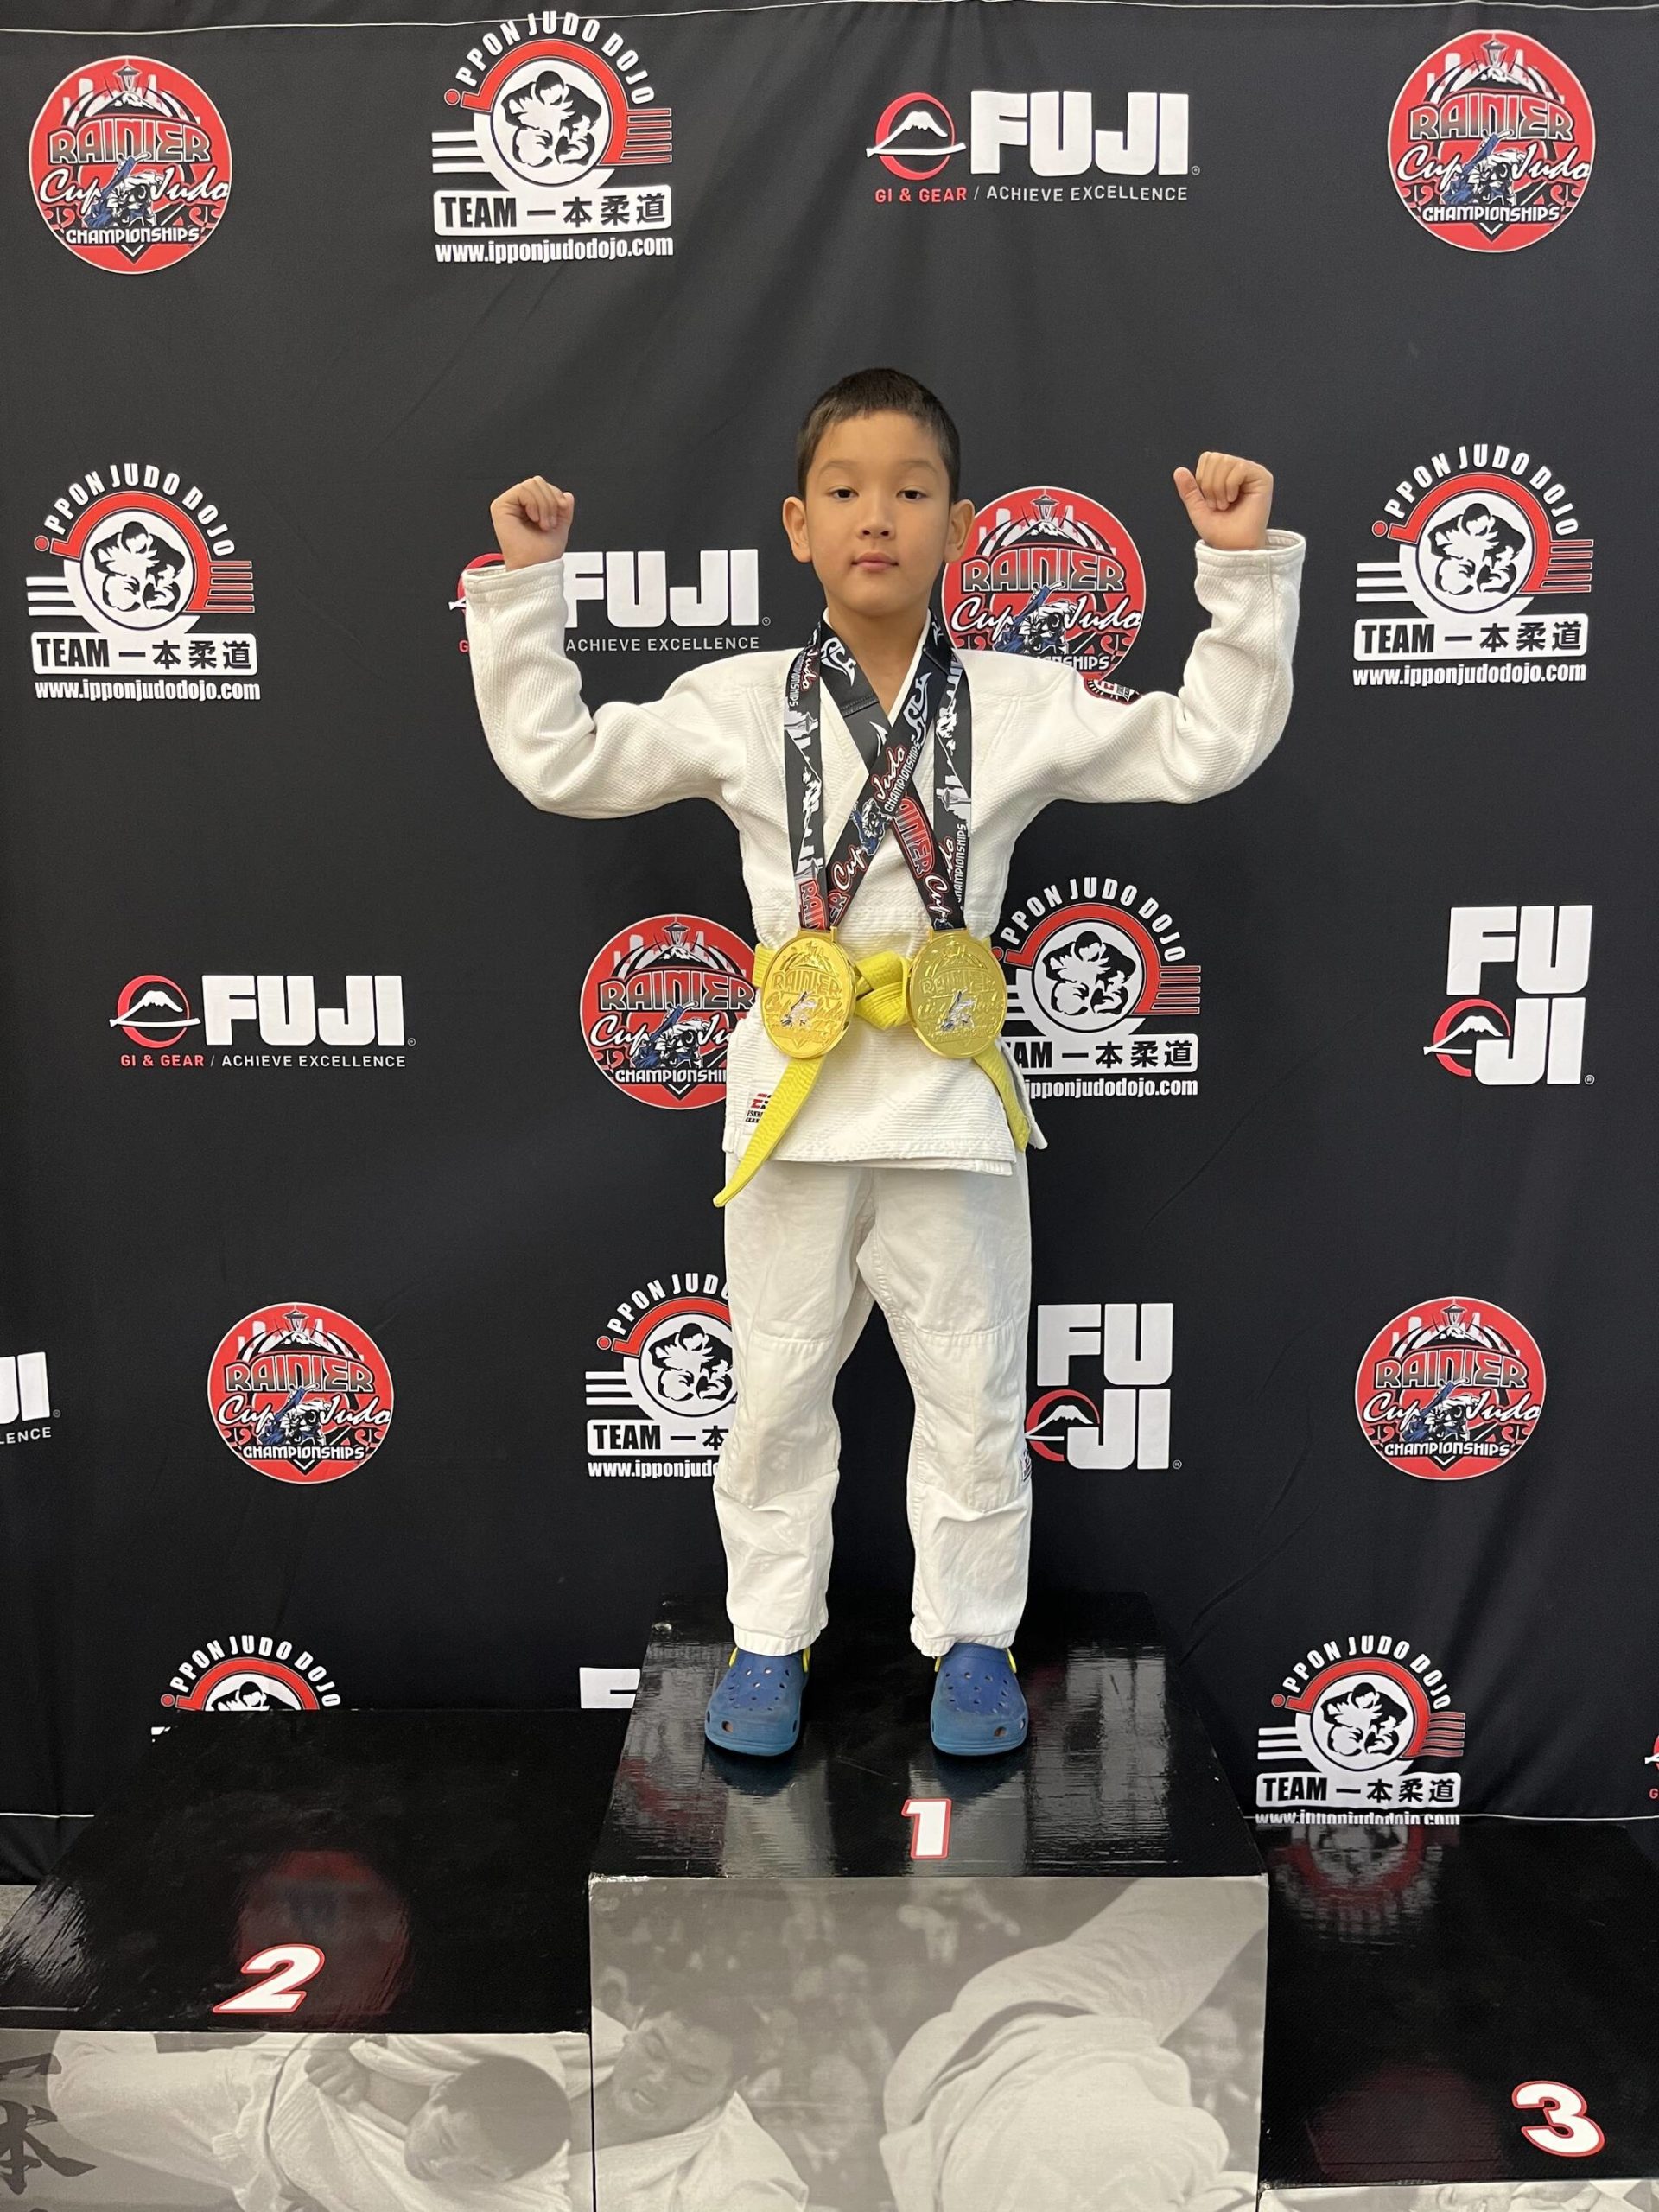 Mikhail Zulaev, a second-grader at Northwood Elementary School, won a pair of gold medals in the boys age 7-8 division in the up to 60 and 70 weight categories at the 2022 Rainier Cup Judo Championships international tournament on Oct. 15 at Pierce College (Fort Steilacoom Campus) in Lakewood. Courtesy photo